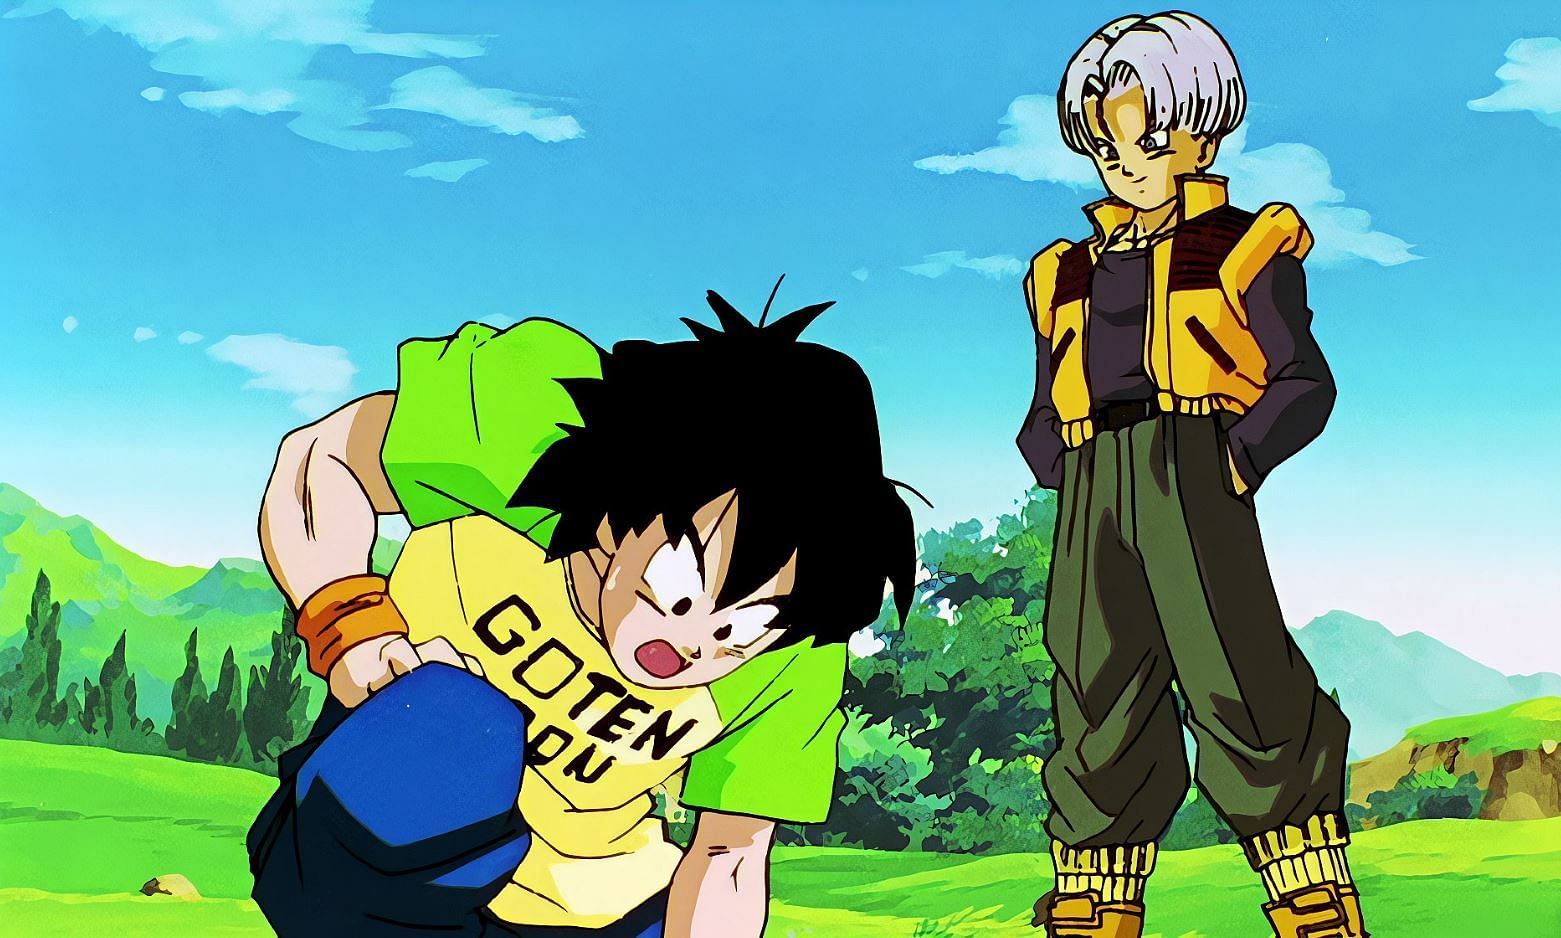 Goten and Trunks as seen in DBZ (Image via Toei Animation)